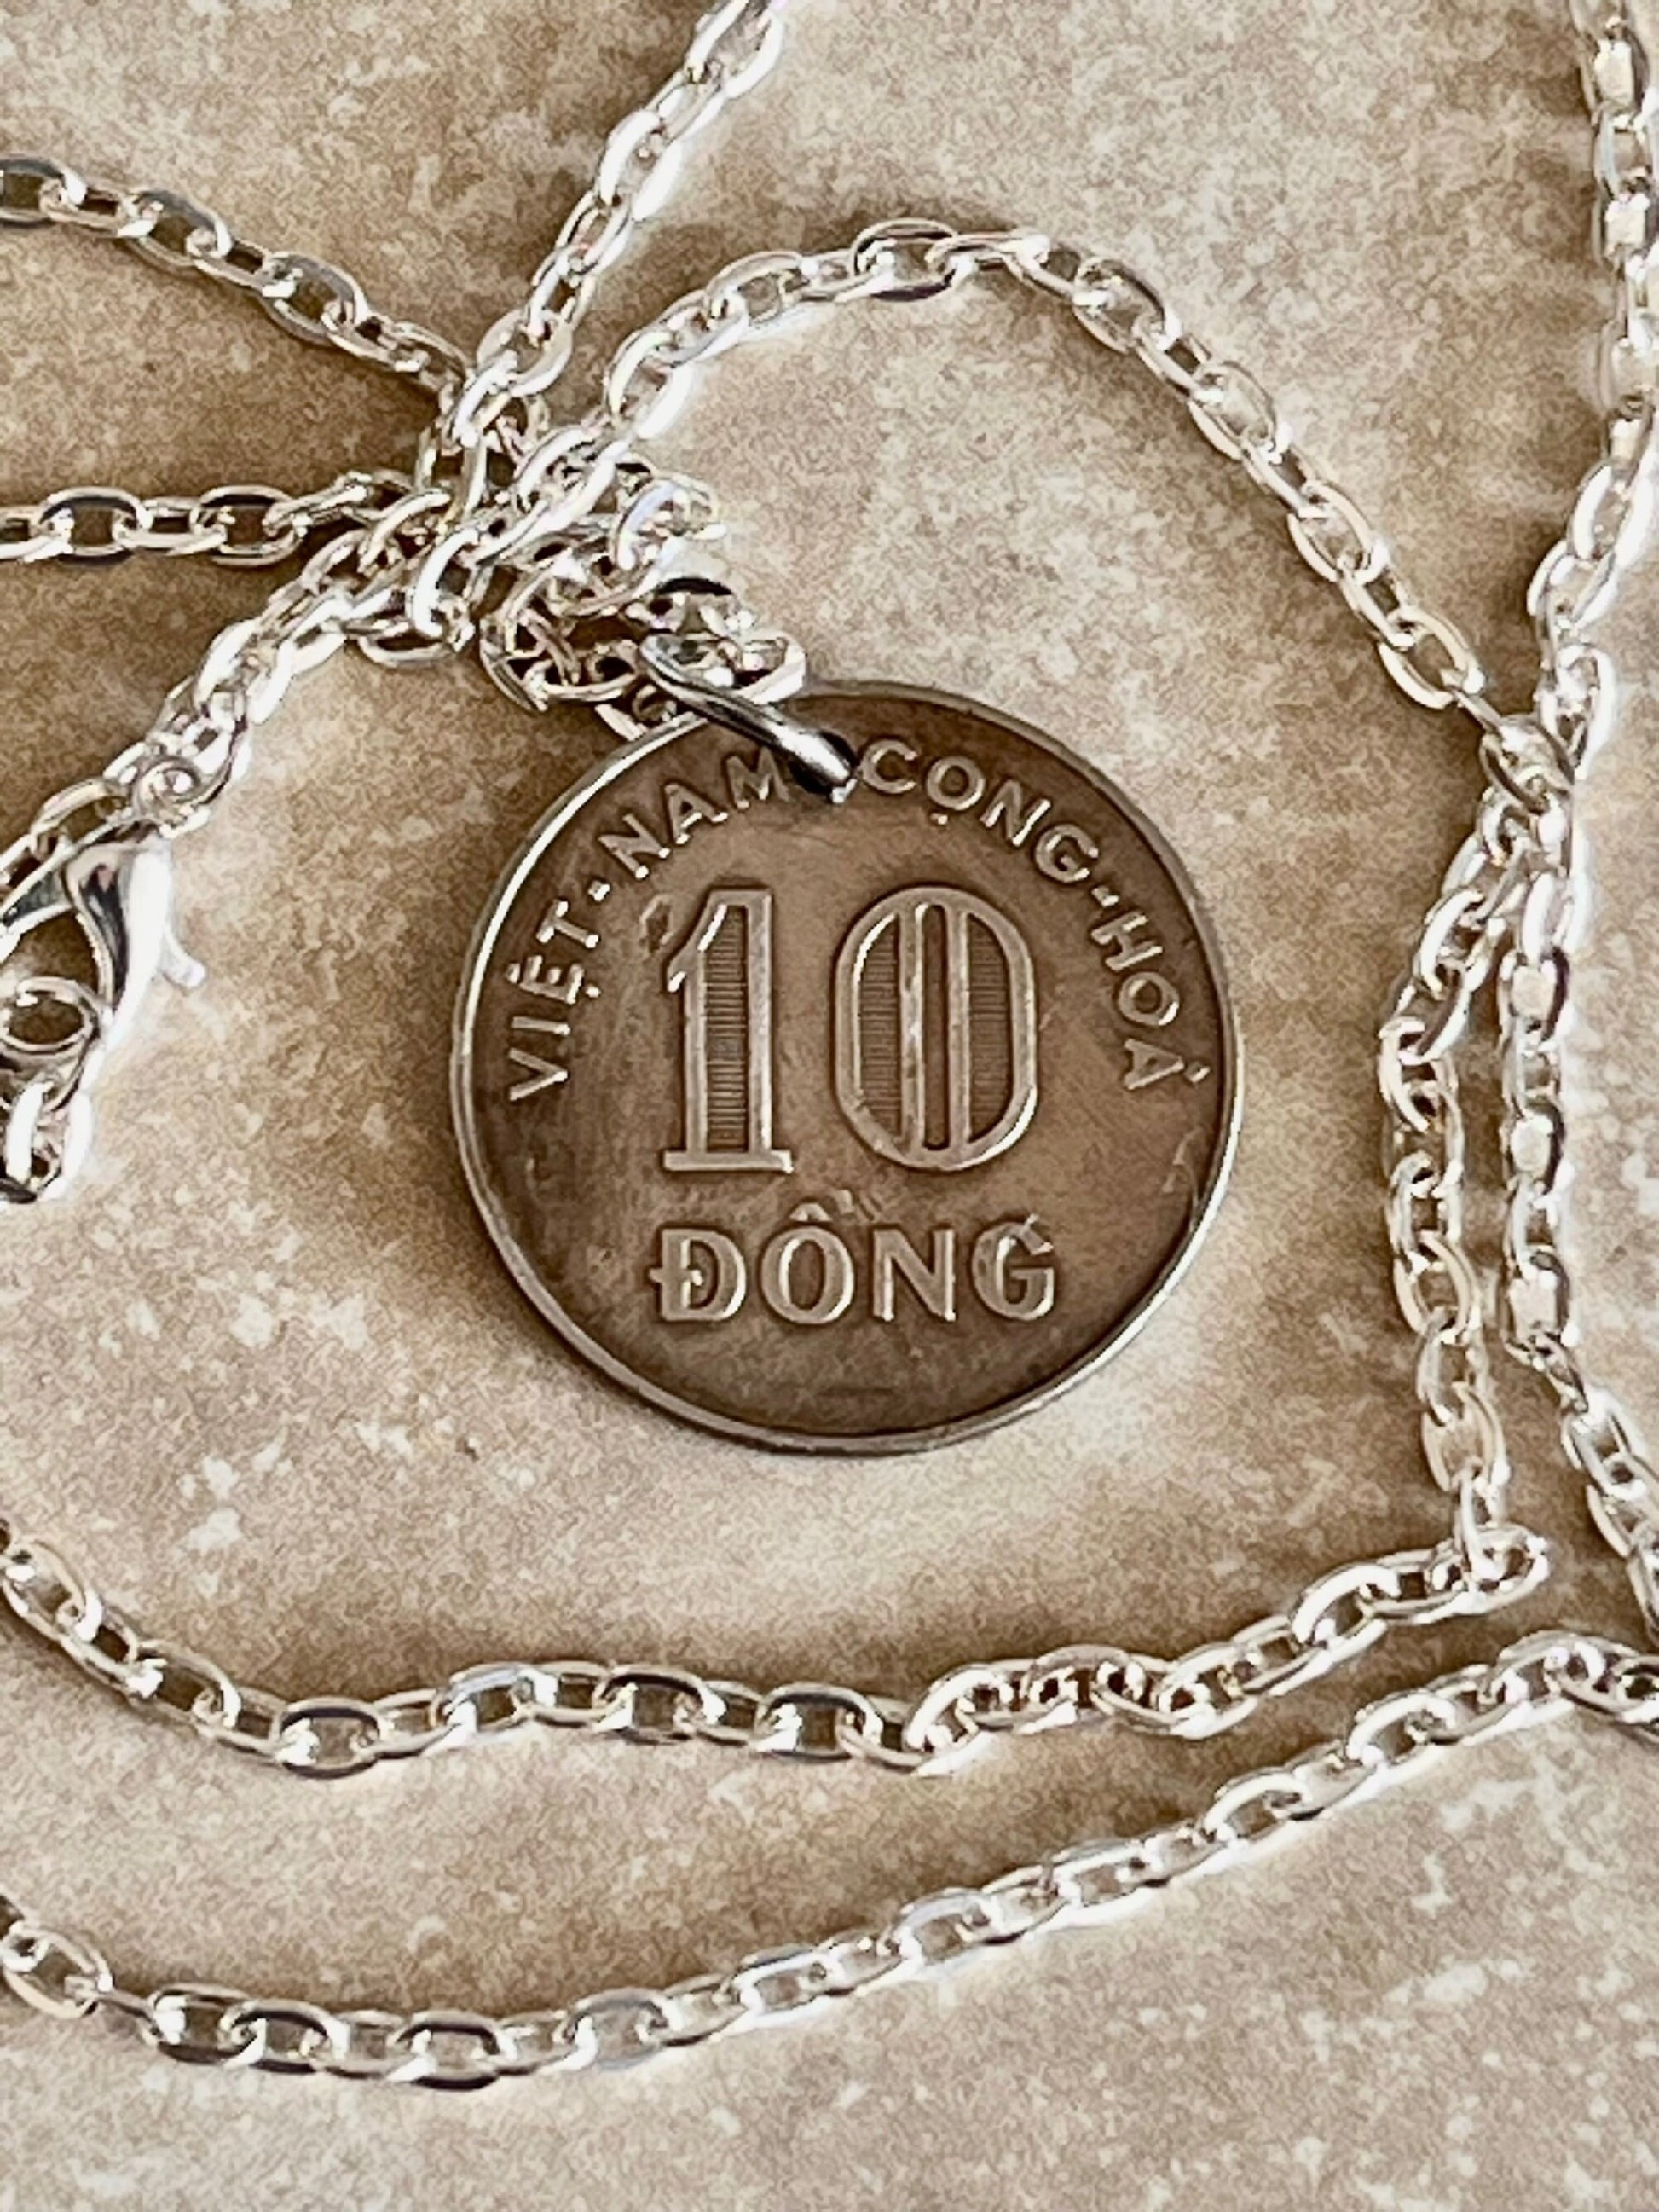 Viet Nam Coin Necklace 10 Dong Coin Hoa Pendant Personal Necklace Old Handmade Jewelry Gift Friend Charm For Him Her World Coin Collector